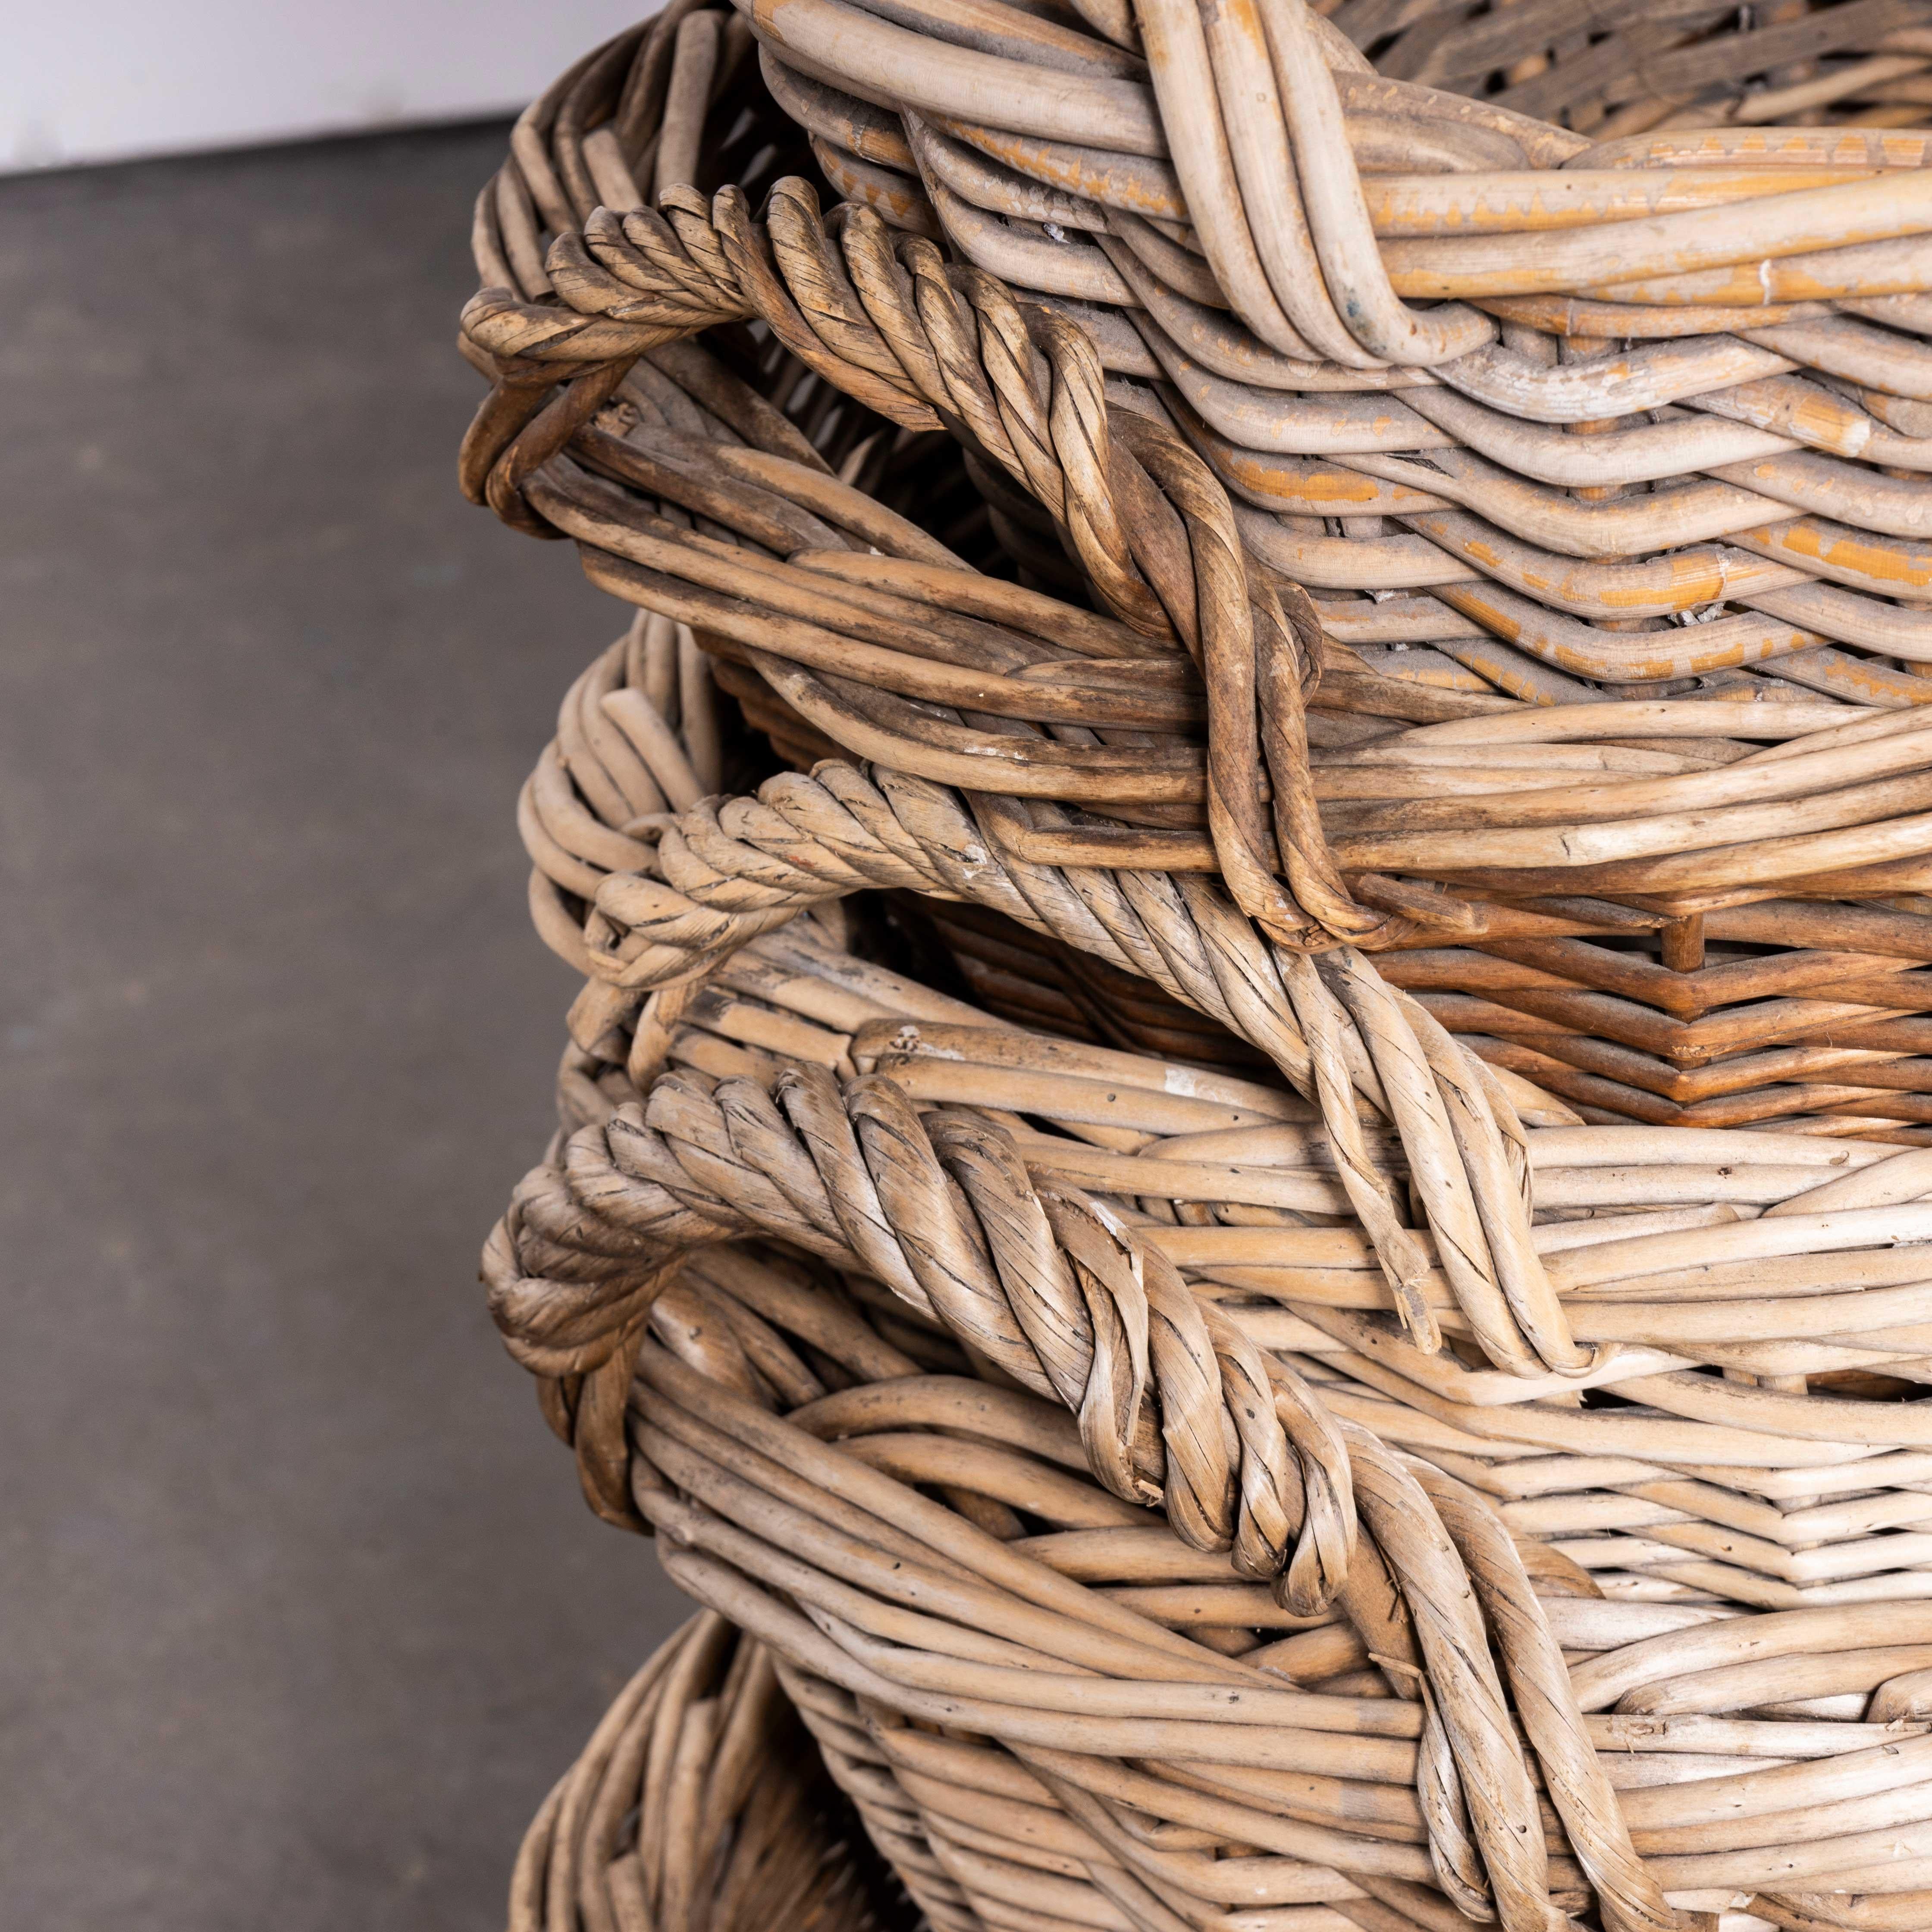 Original French Handmade Oval Willow Baskets
Original French Handmade Willow Baskets. Good honest French baskets, we have a number available. Largest size 76cm long, 52cm wide, 40cm high. Smallest basket is almost round at 48cm width.

WORKSHOP